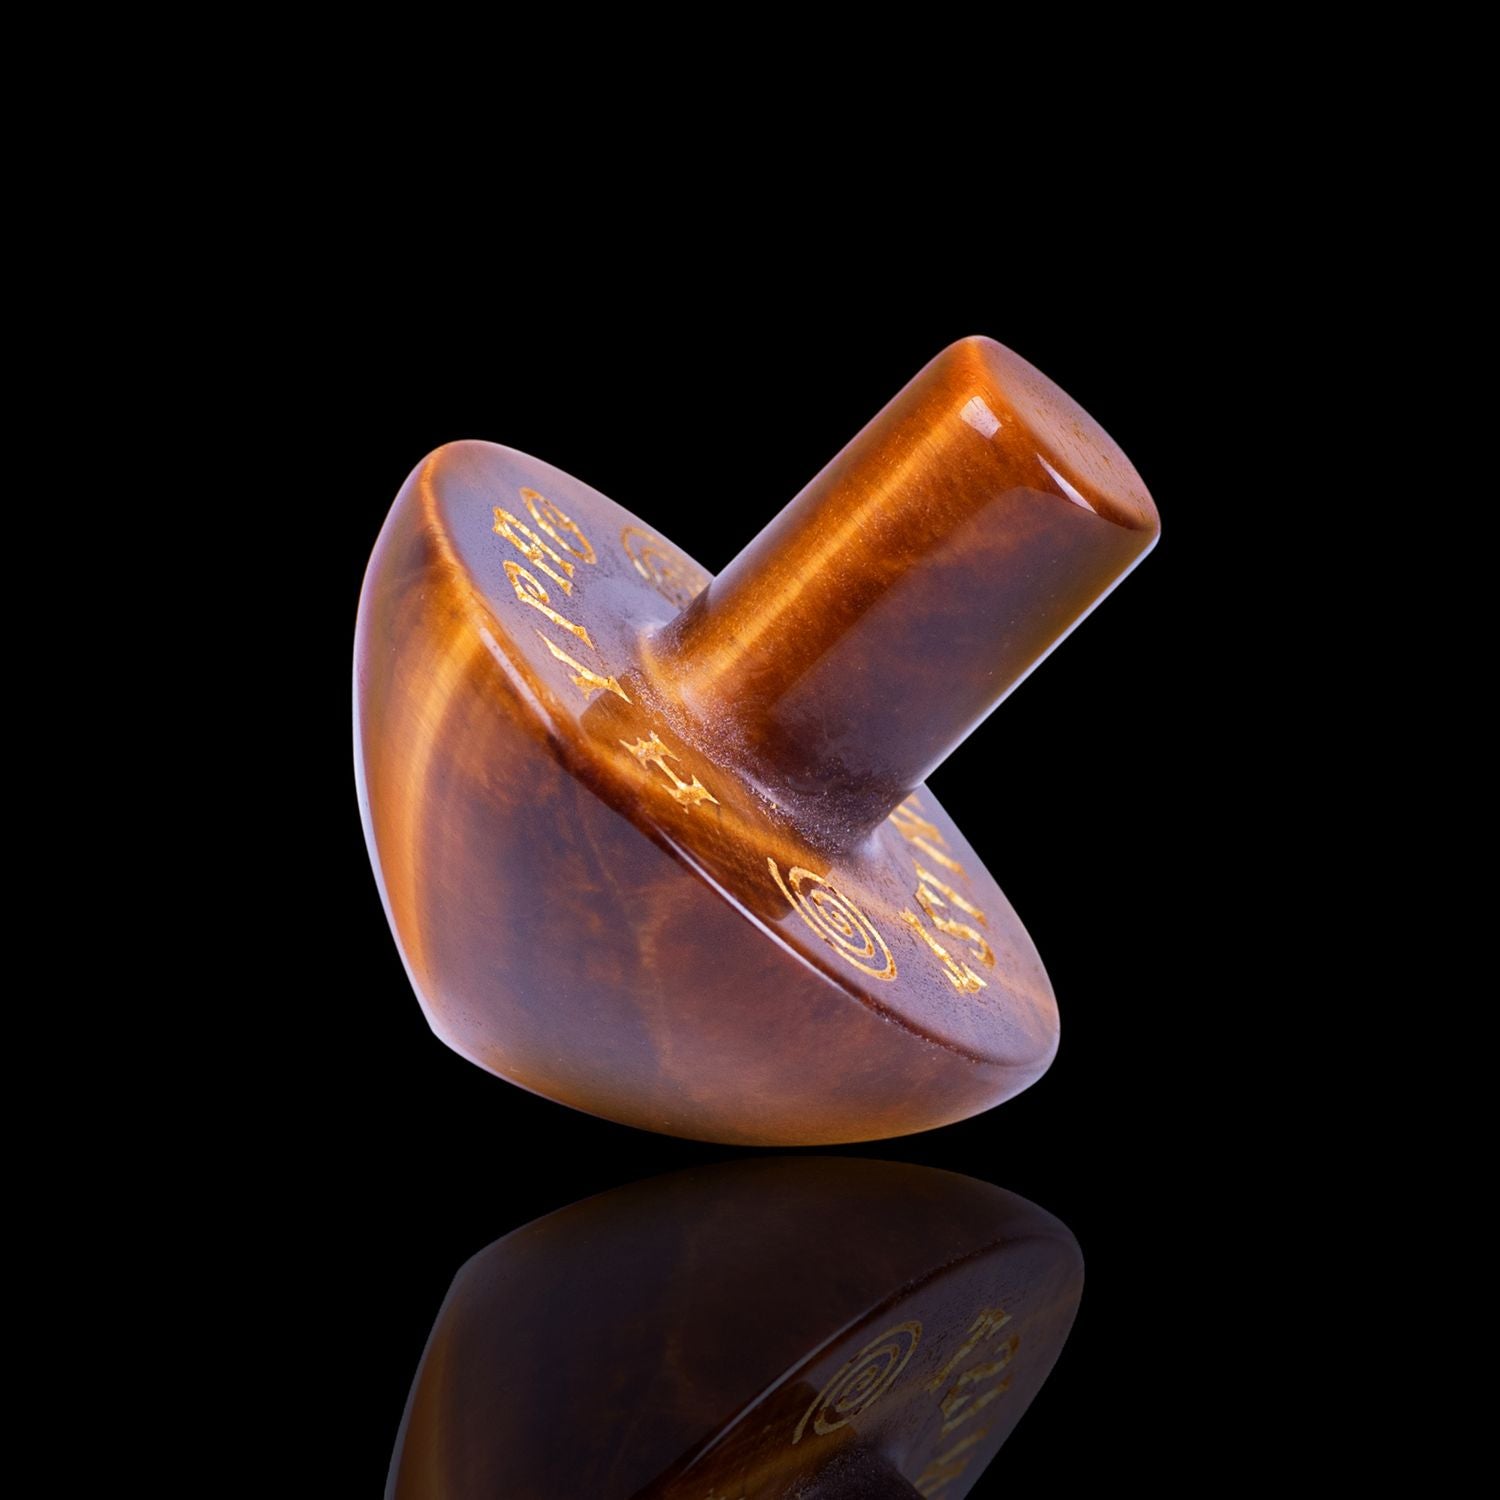 Naturally Wicked Exclusive Hypnotwister. A Tiger's Eye Crystal Spinning Top Engraved With Hypno Twist